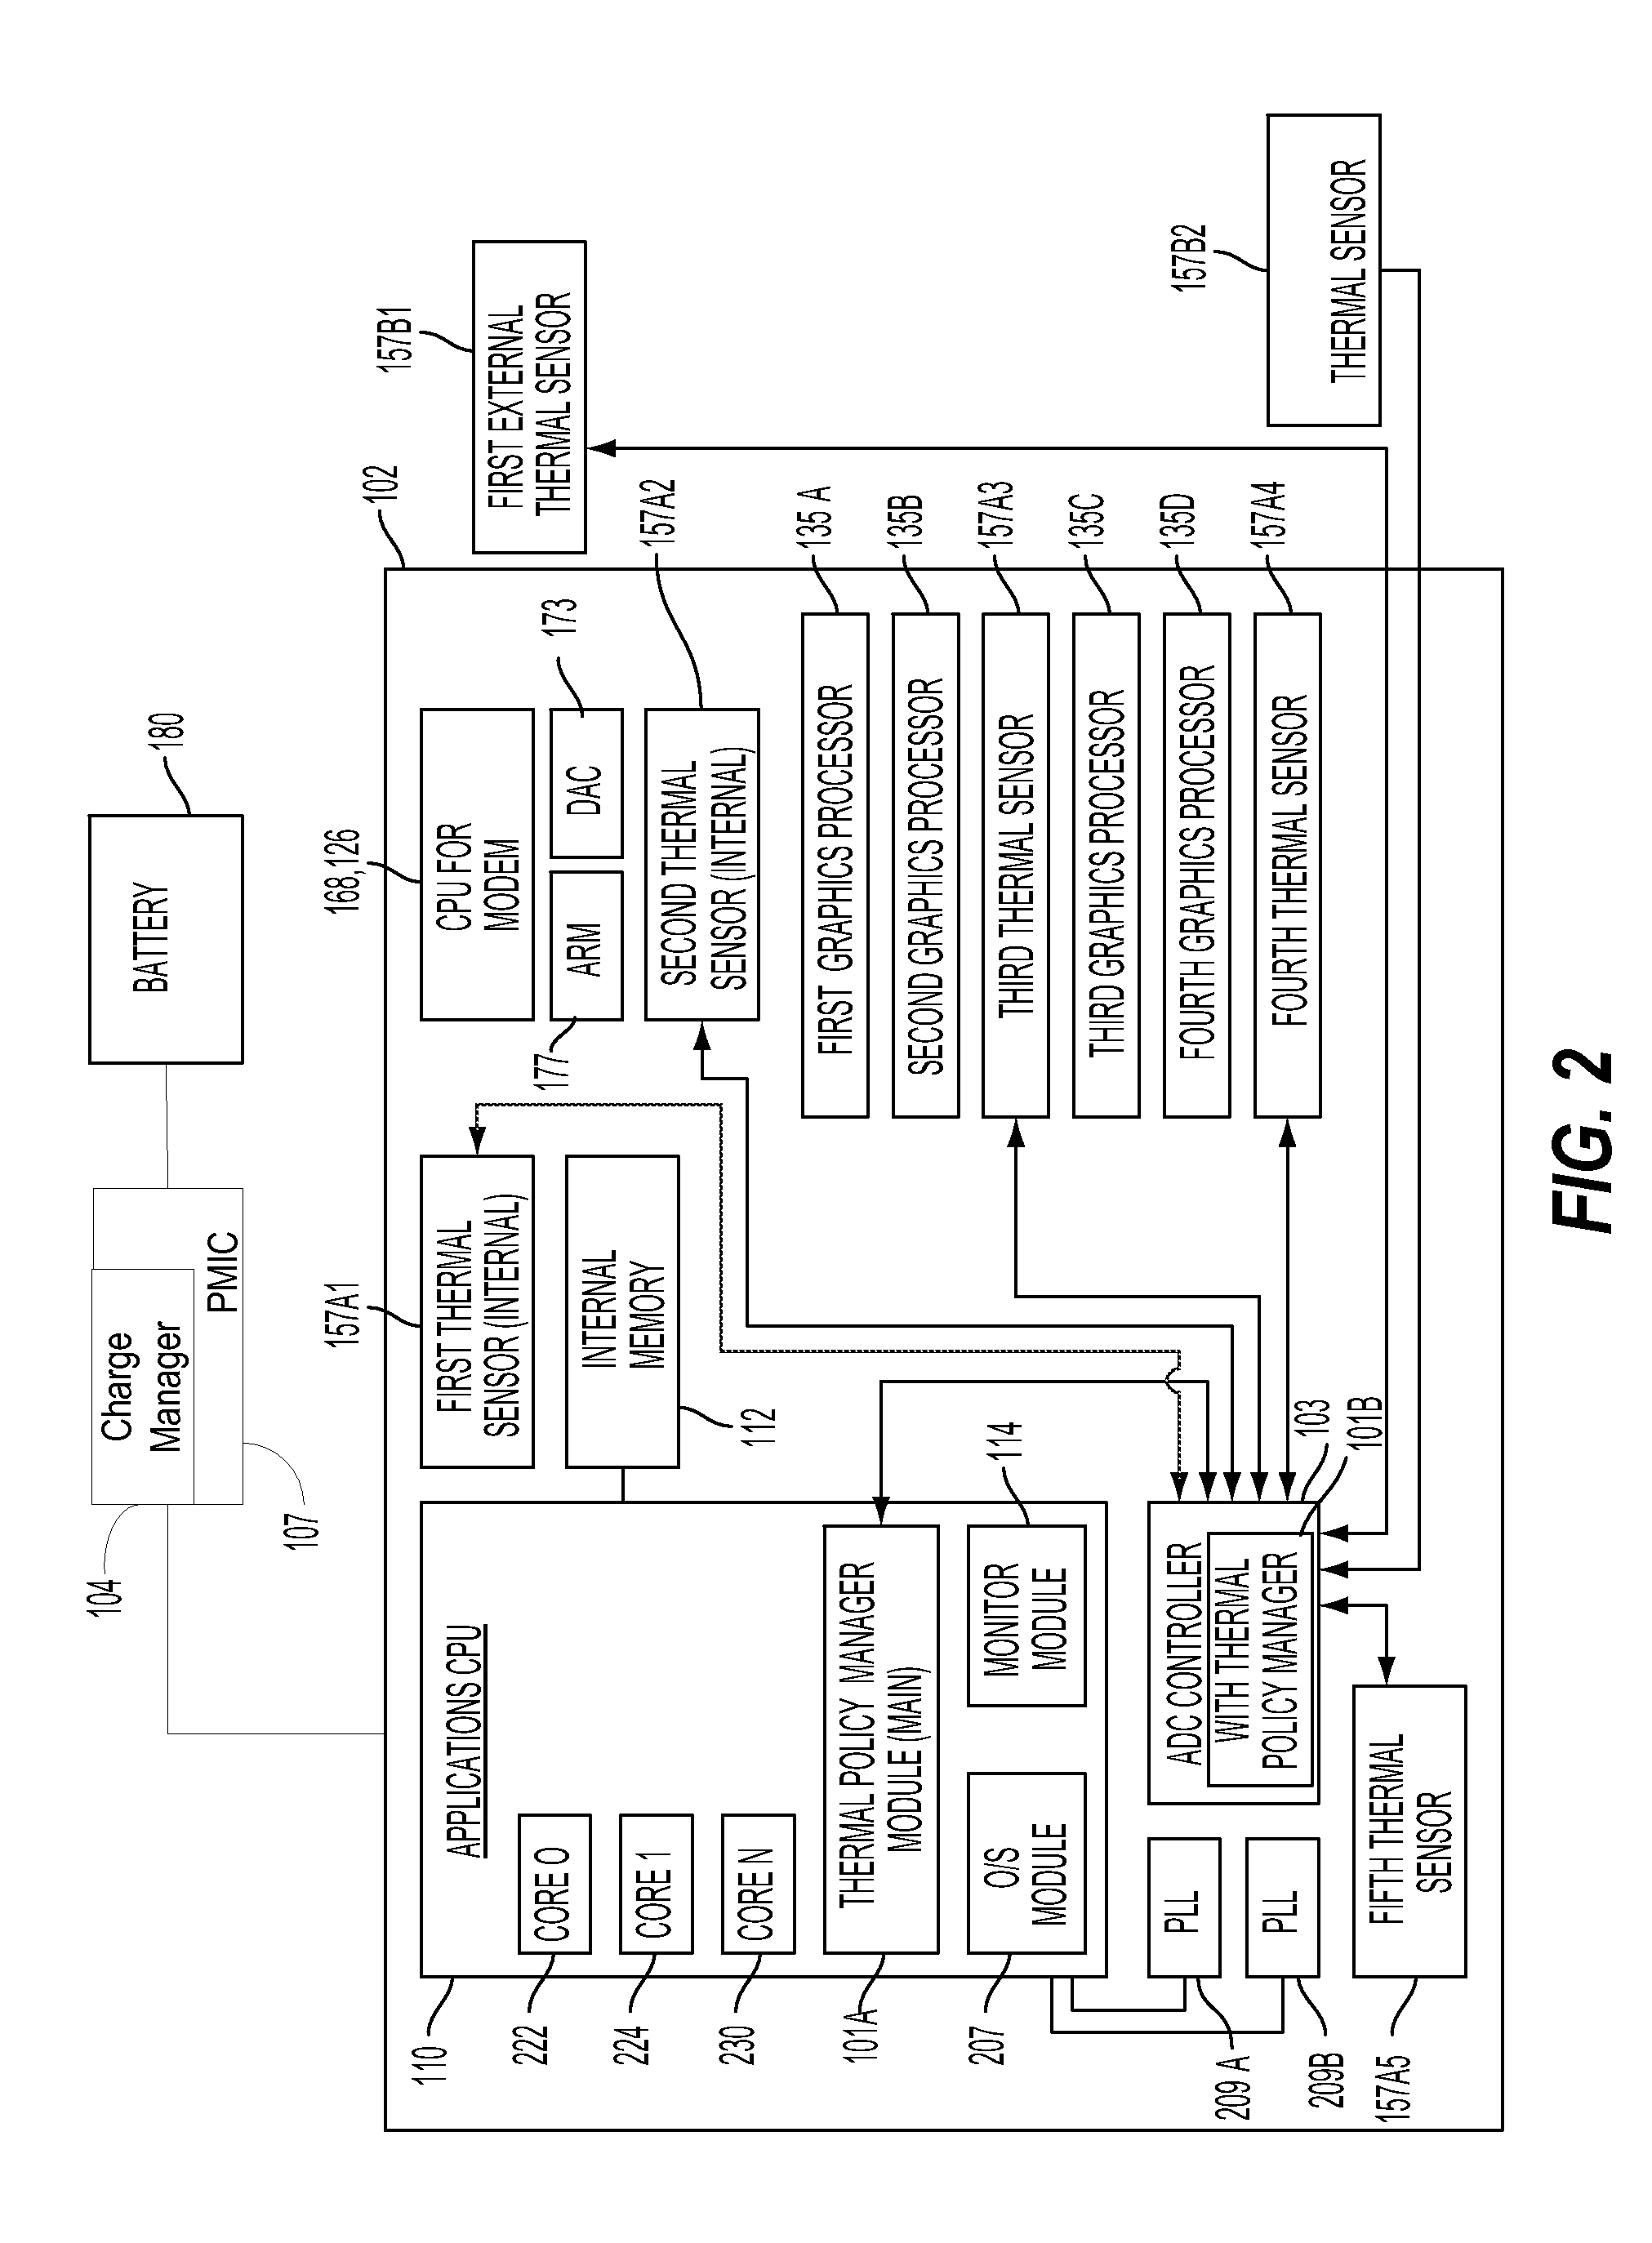 Method and system for thermal management of battery charging concurrencies in a portable computing device